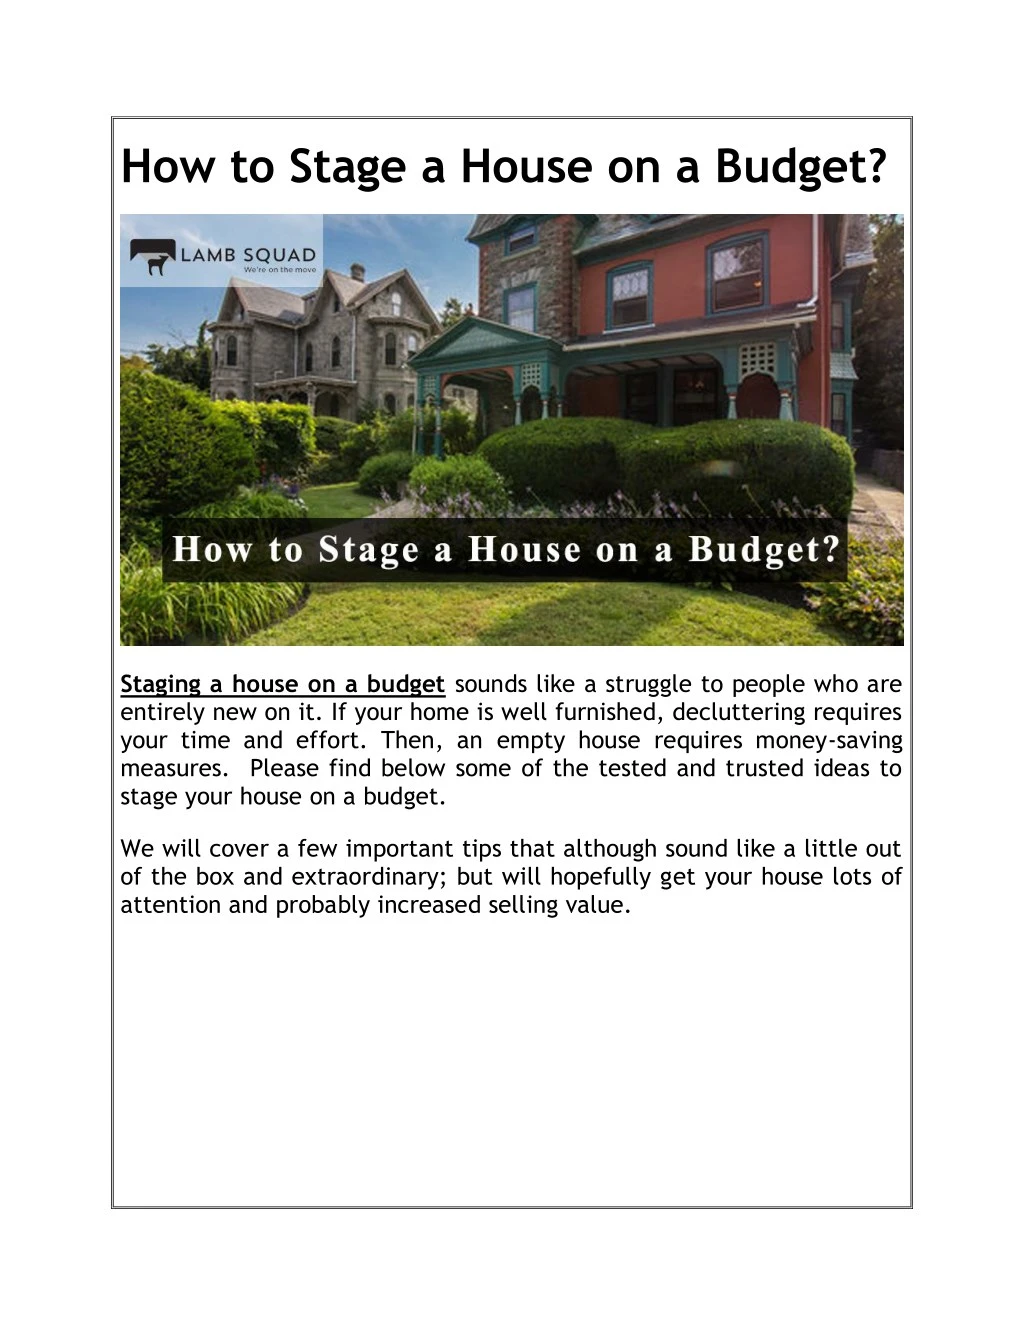 how to stage a house on a budget